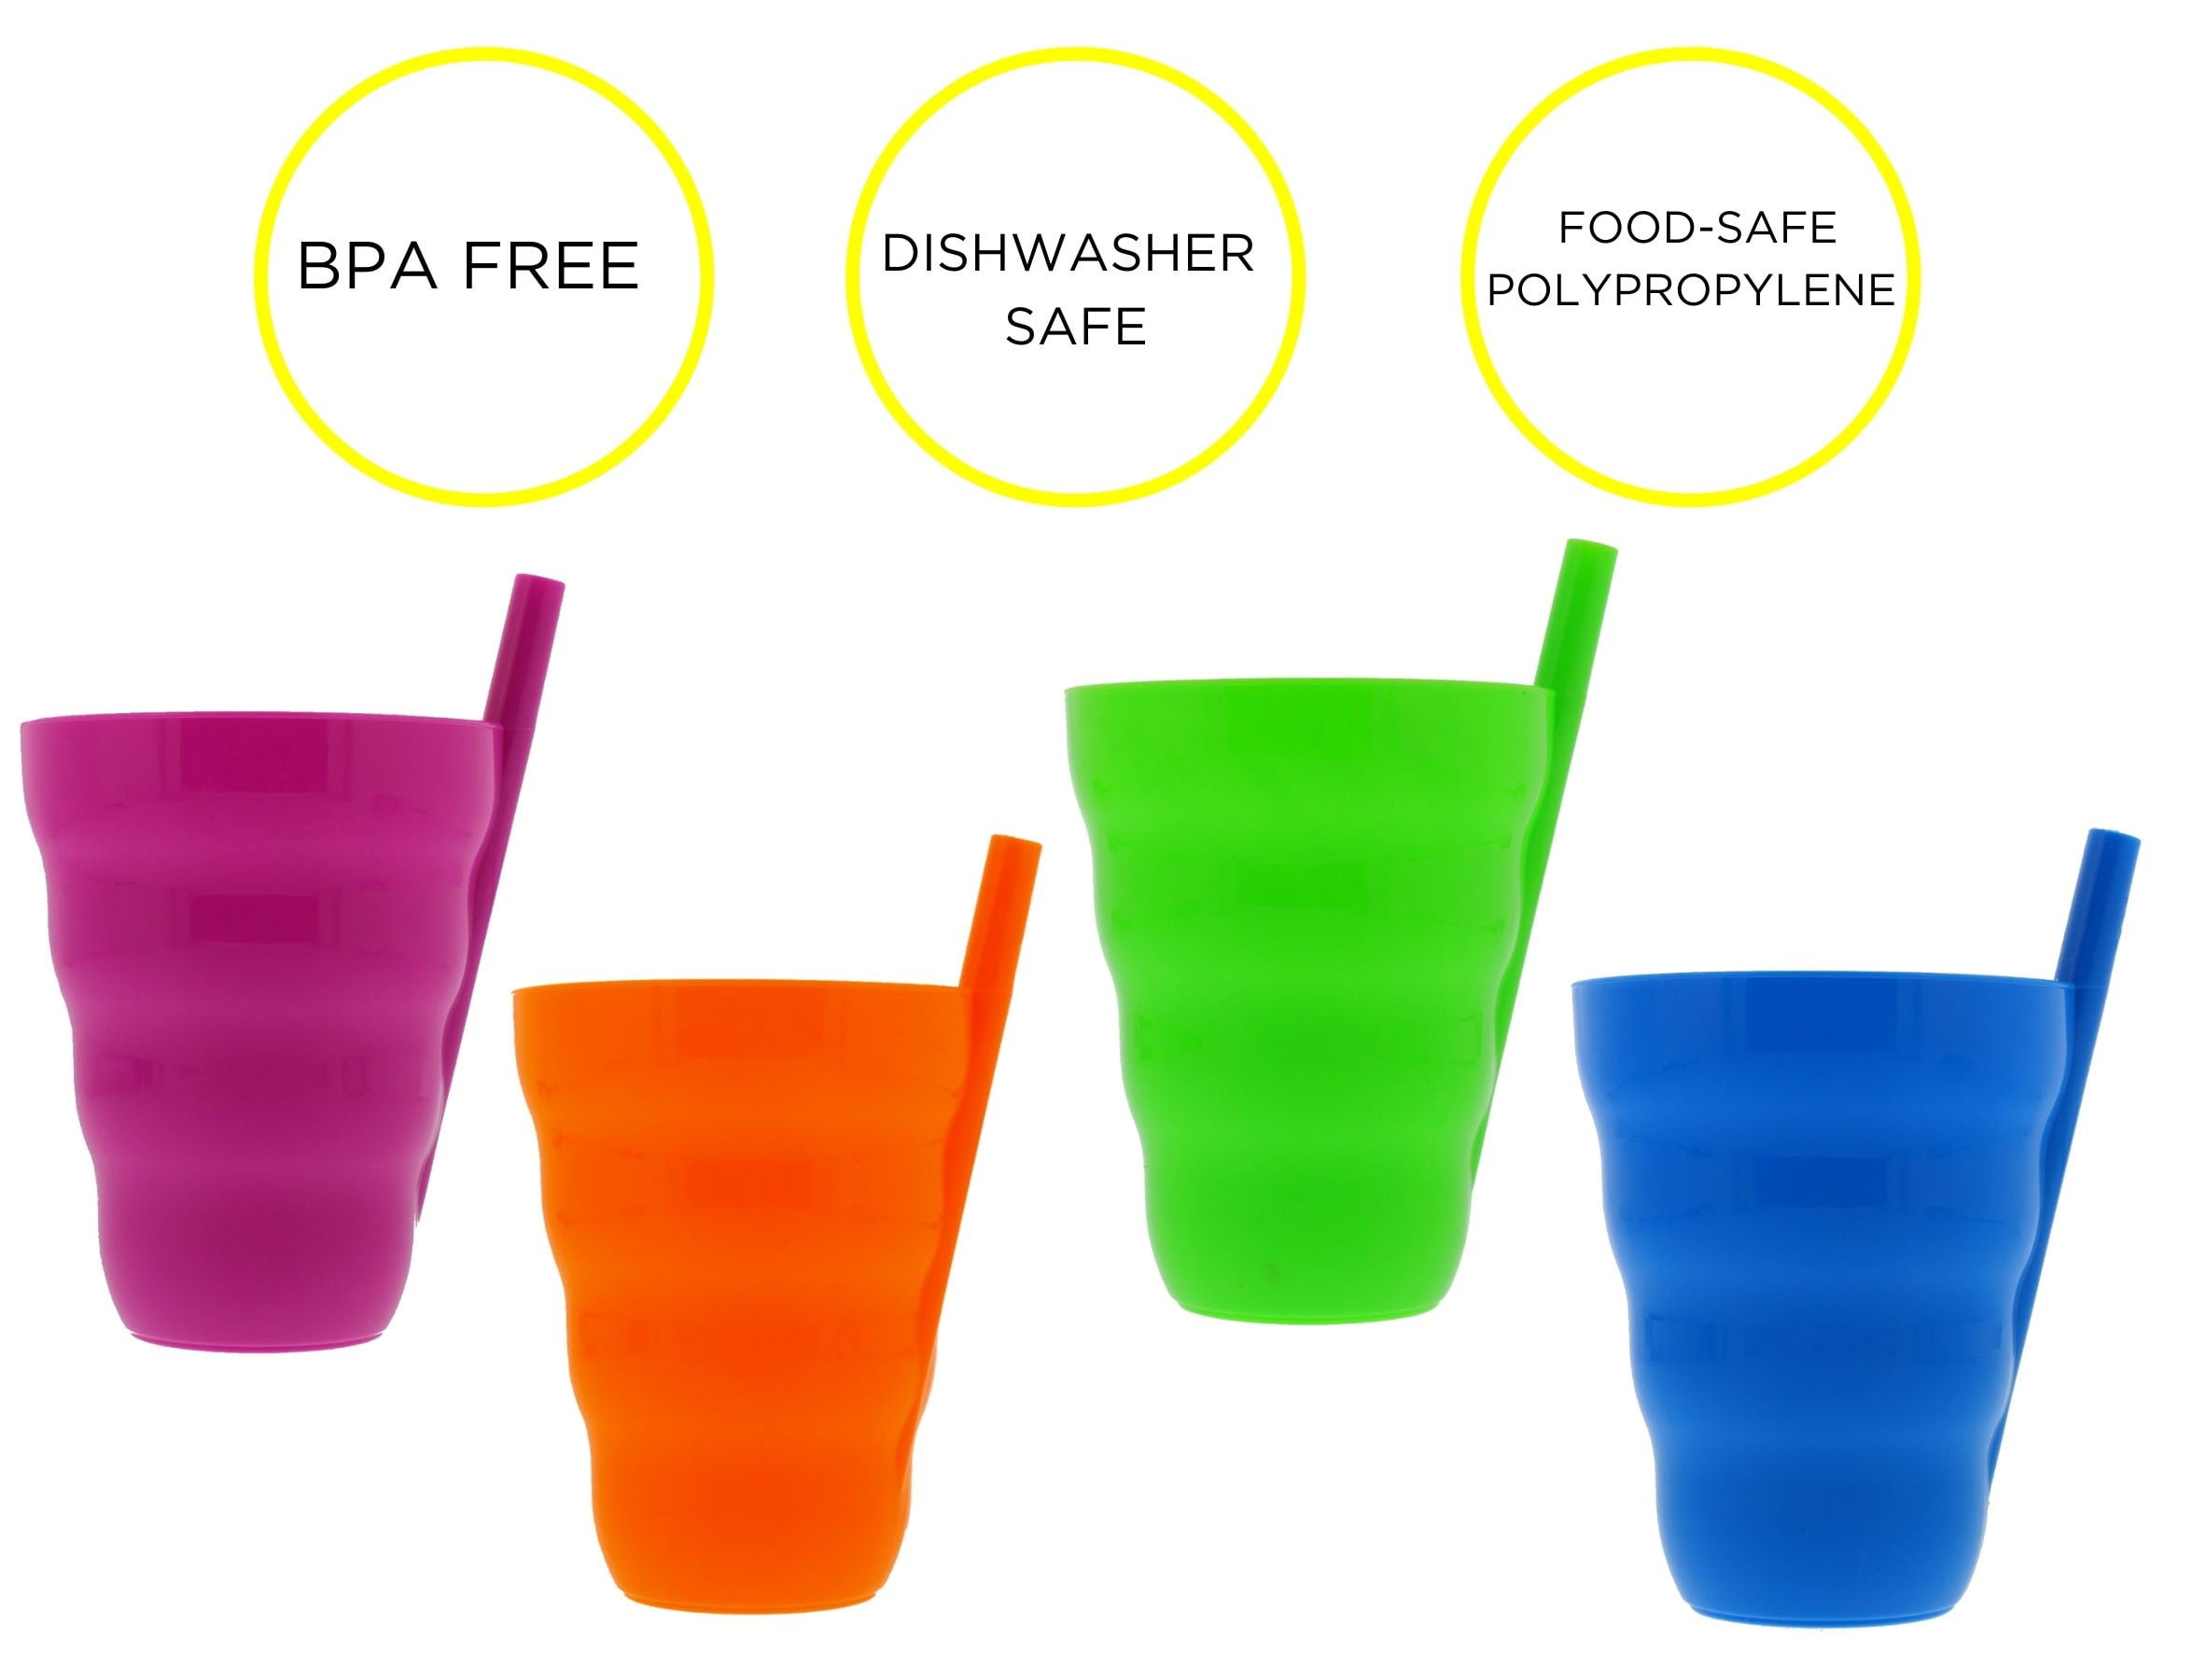 Baby Products Online - Klickpick Home Kids cups with built-in straw - a set  of 8 drinking cups for toddlers with 10 ounce straws - for children to sip  a safe dishwasher